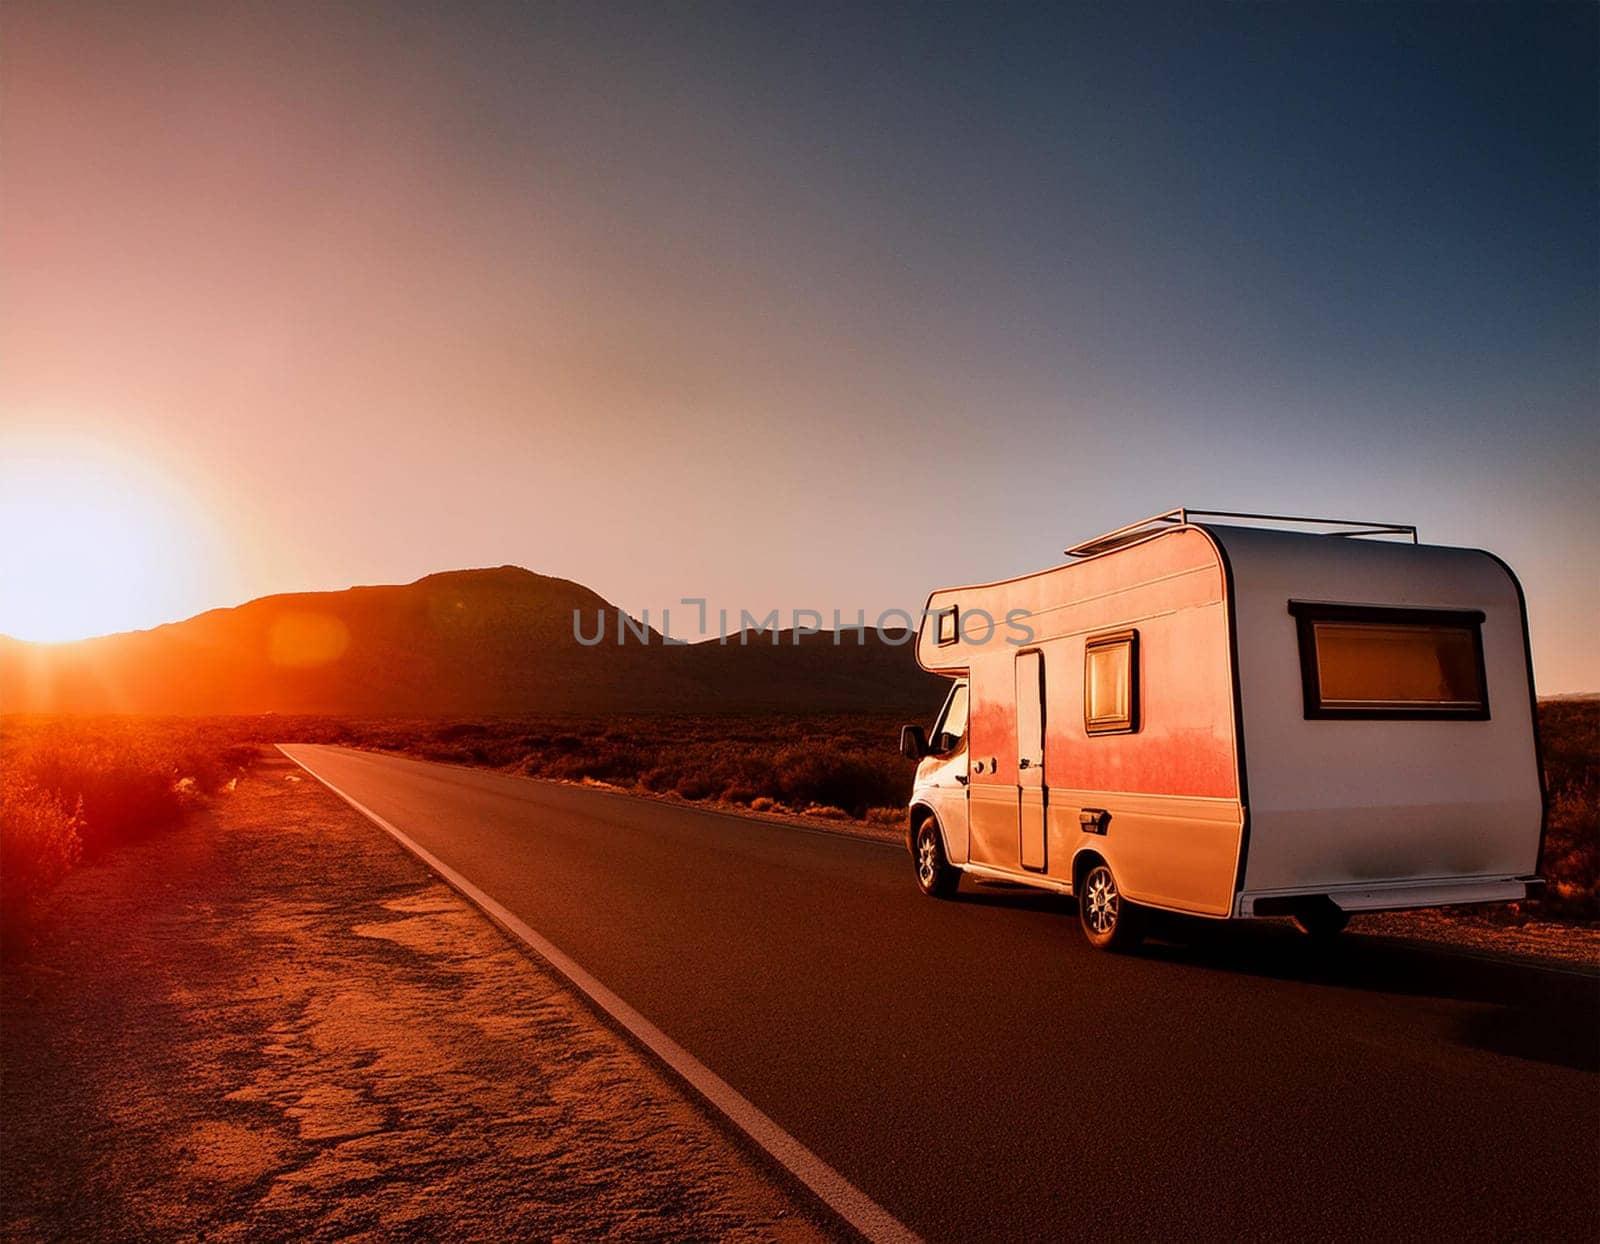 Motorhome at sunrise on the Mediterranean coast Costa del Sol, Andalusia Spain. Camping on the natural beach. Vacation and travel in a motorhome.